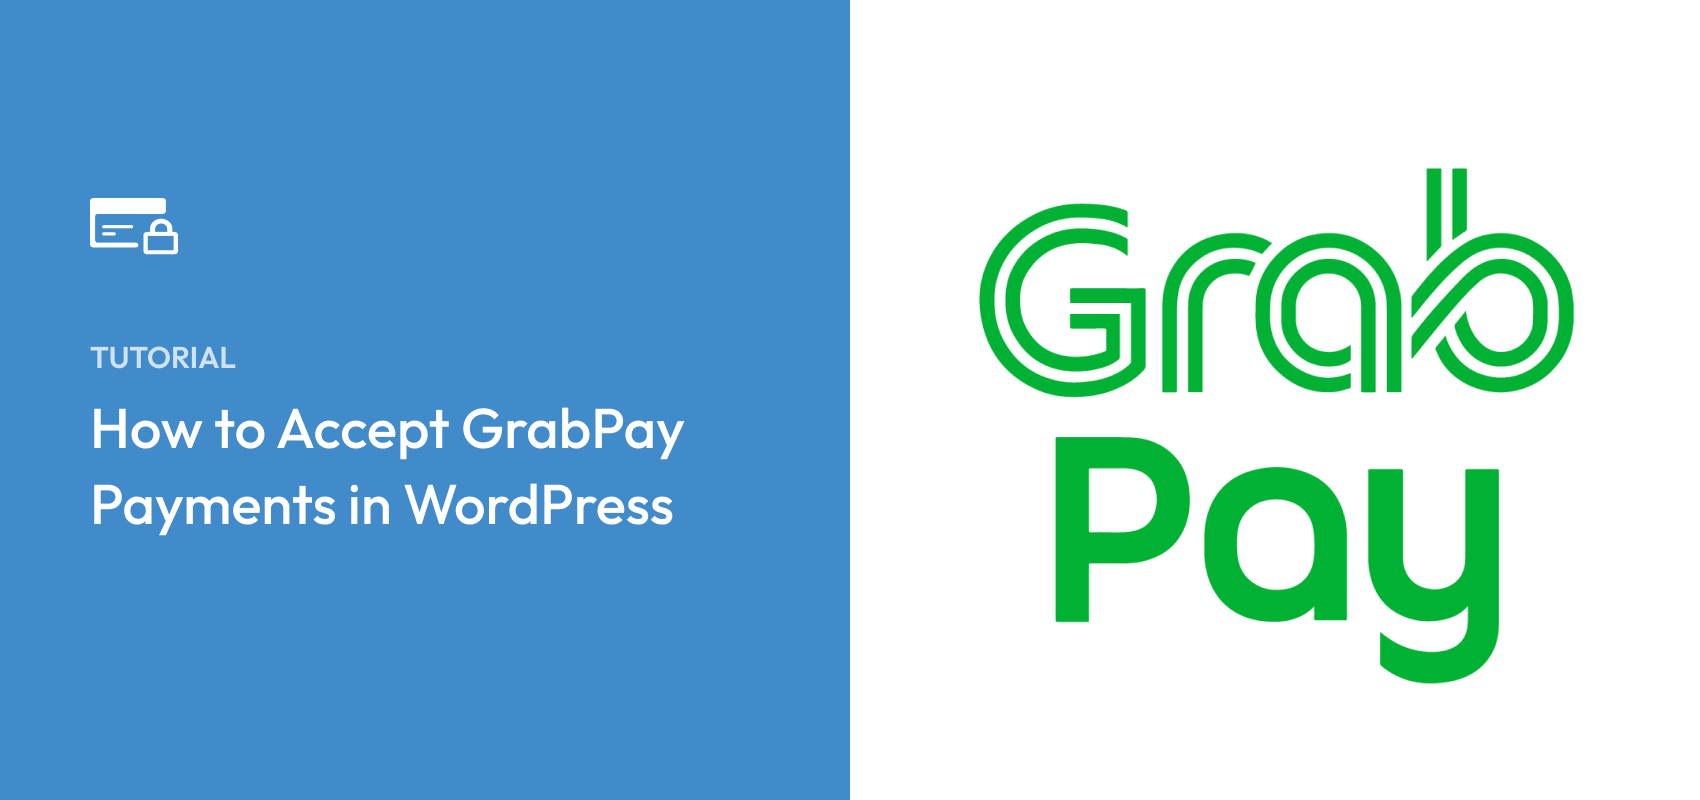 How to Accept GrabPay Payments in WordPress